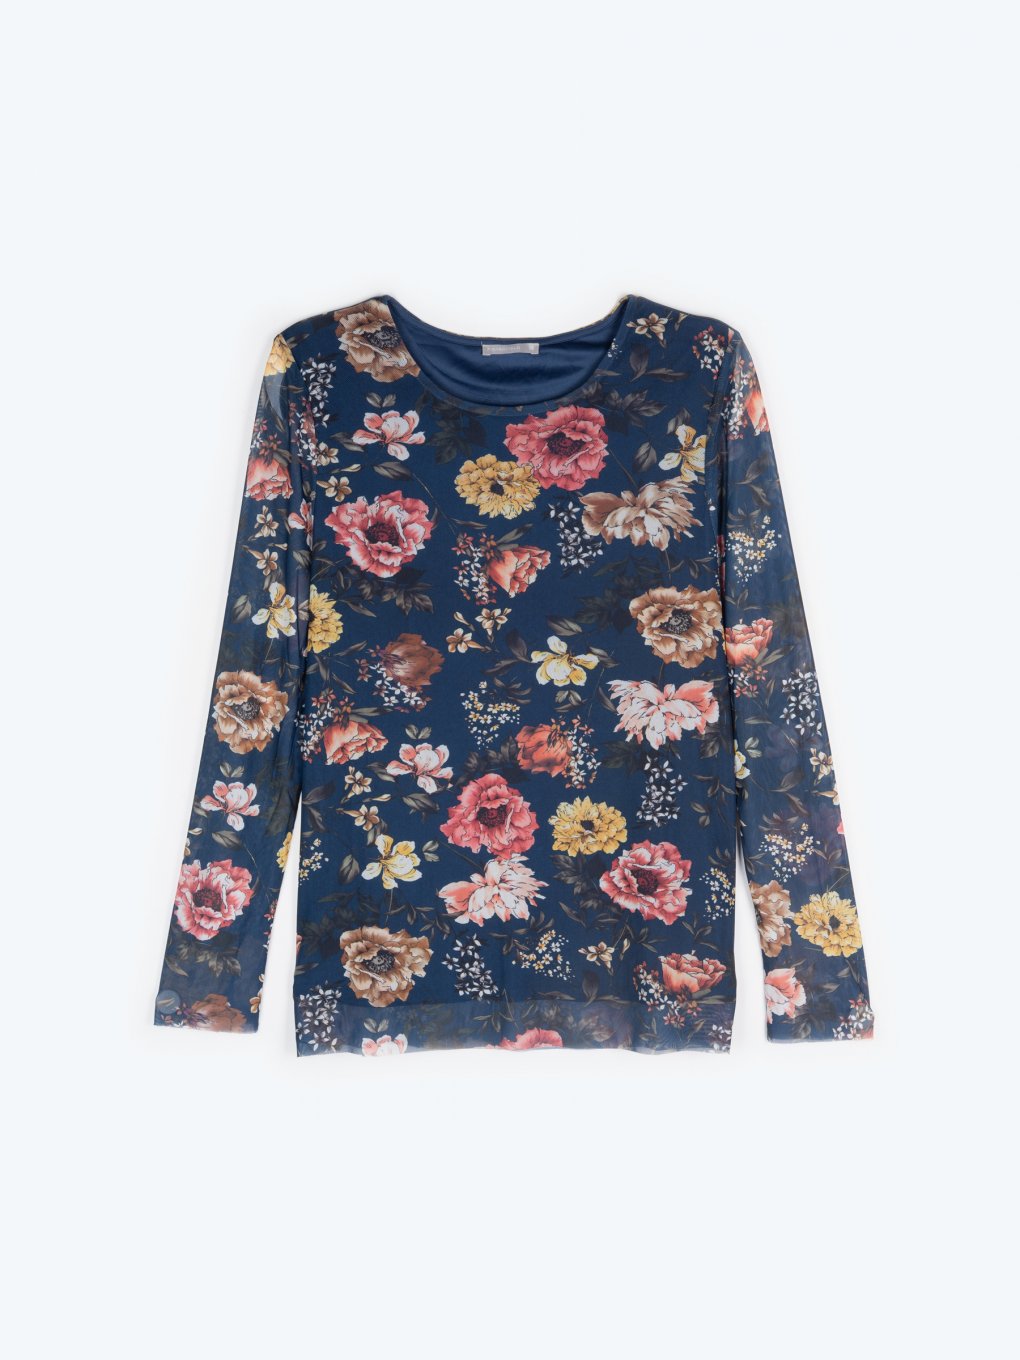 Mesh top with flower print